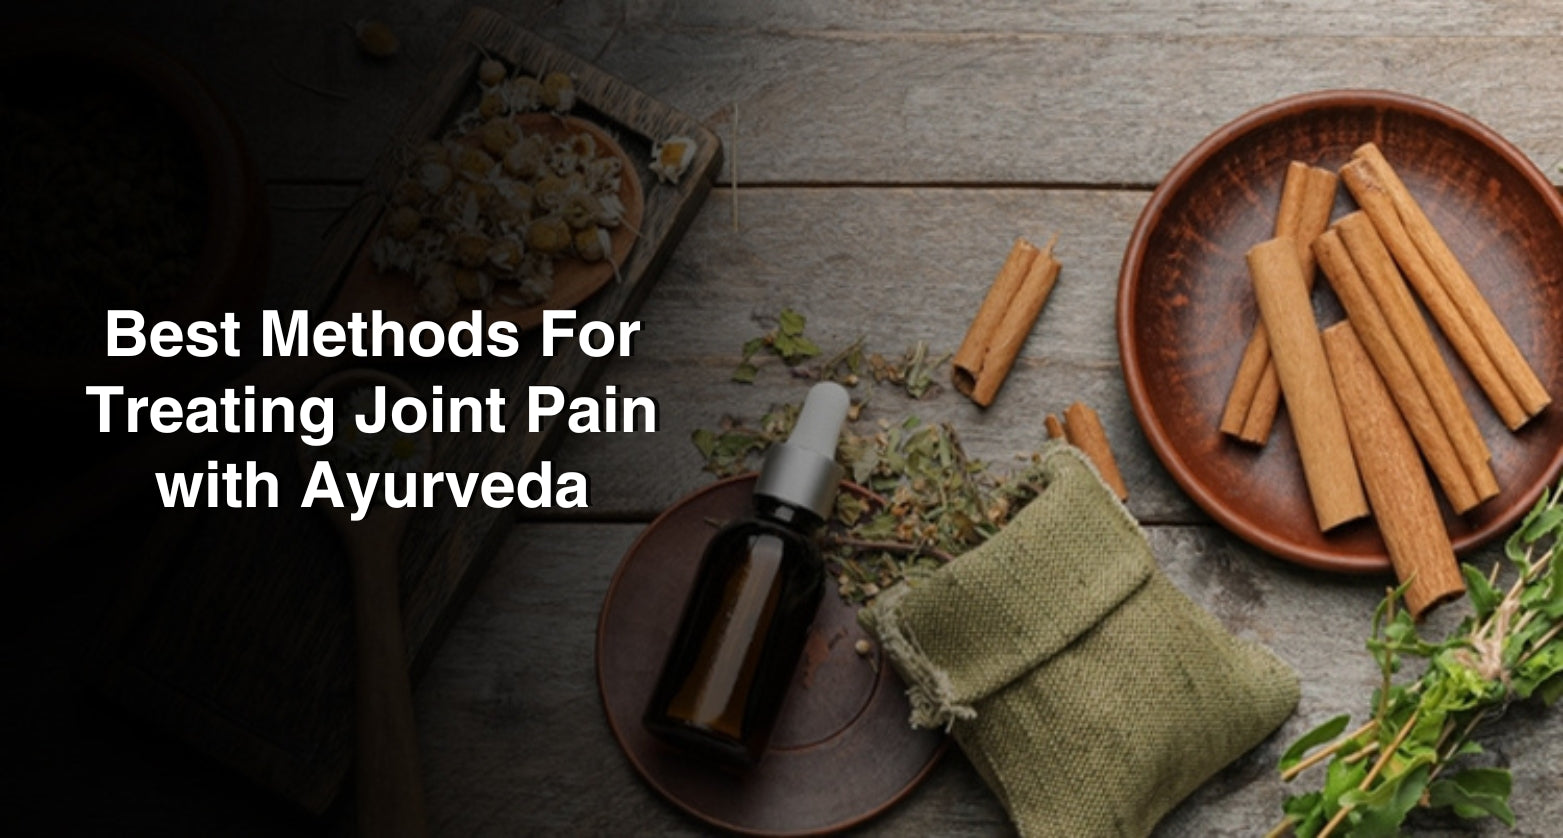 Best Methods For Treating Joint Pain with Ayurveda